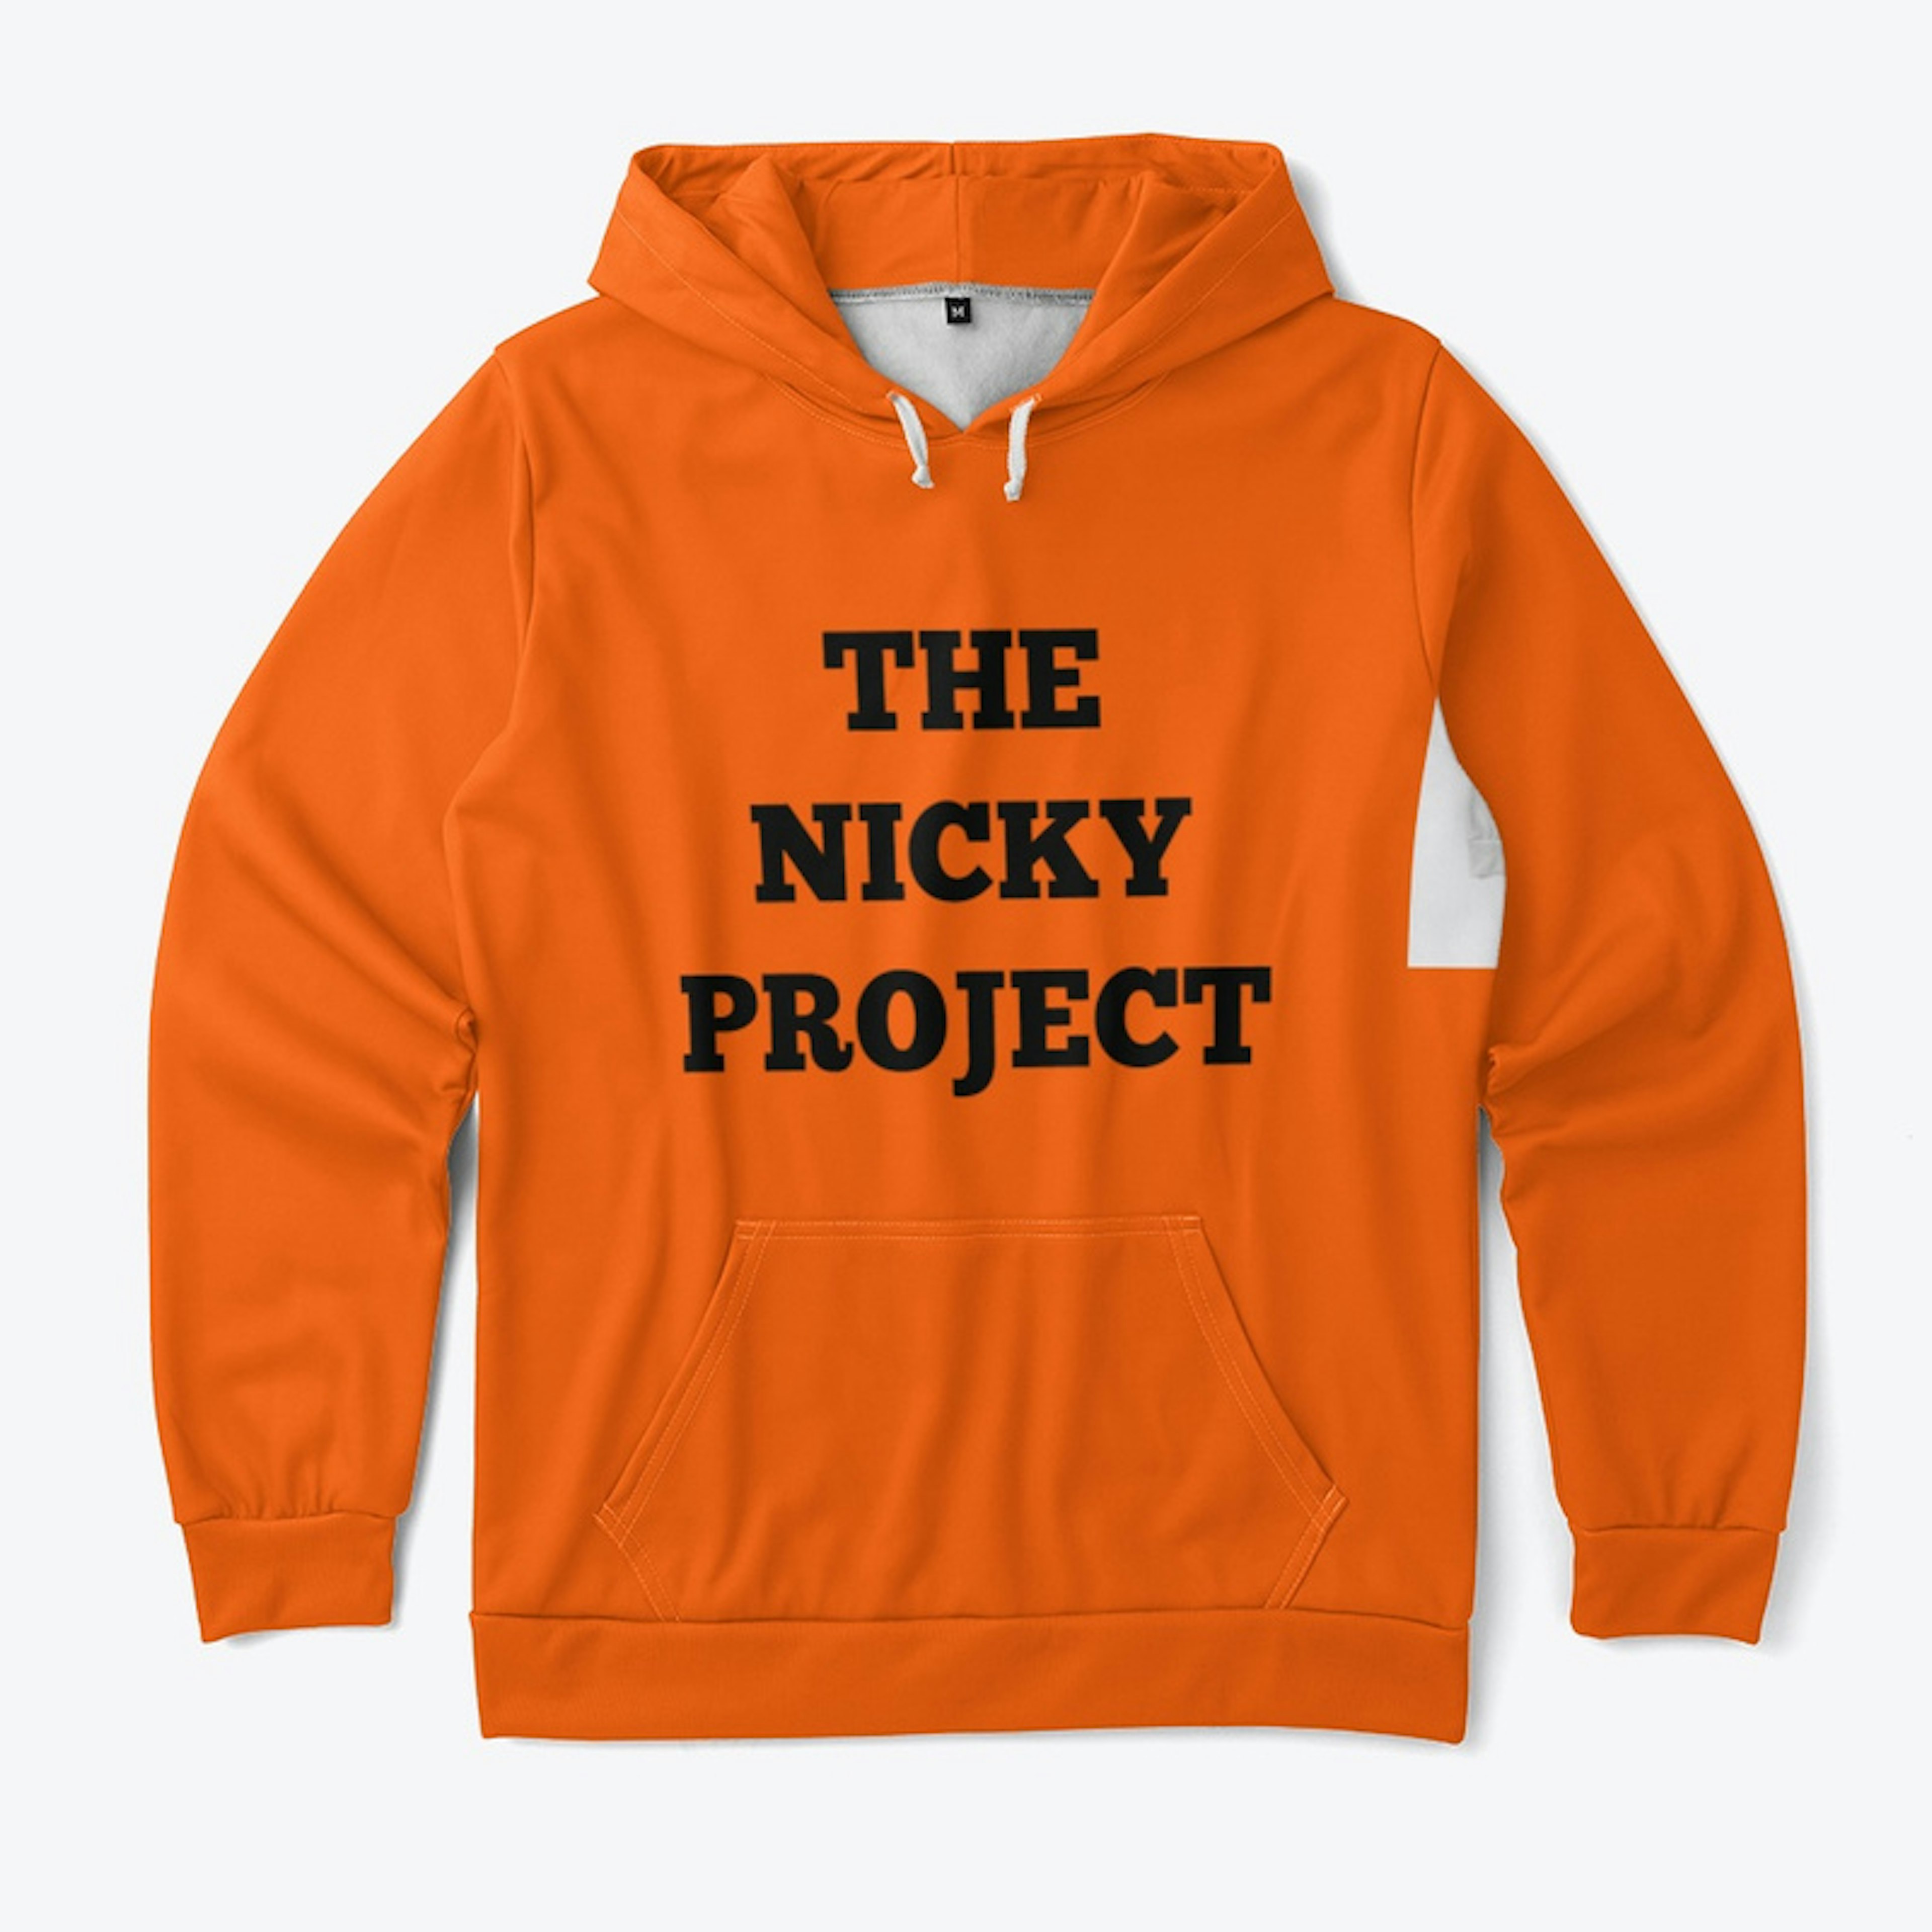 The Nicky Project